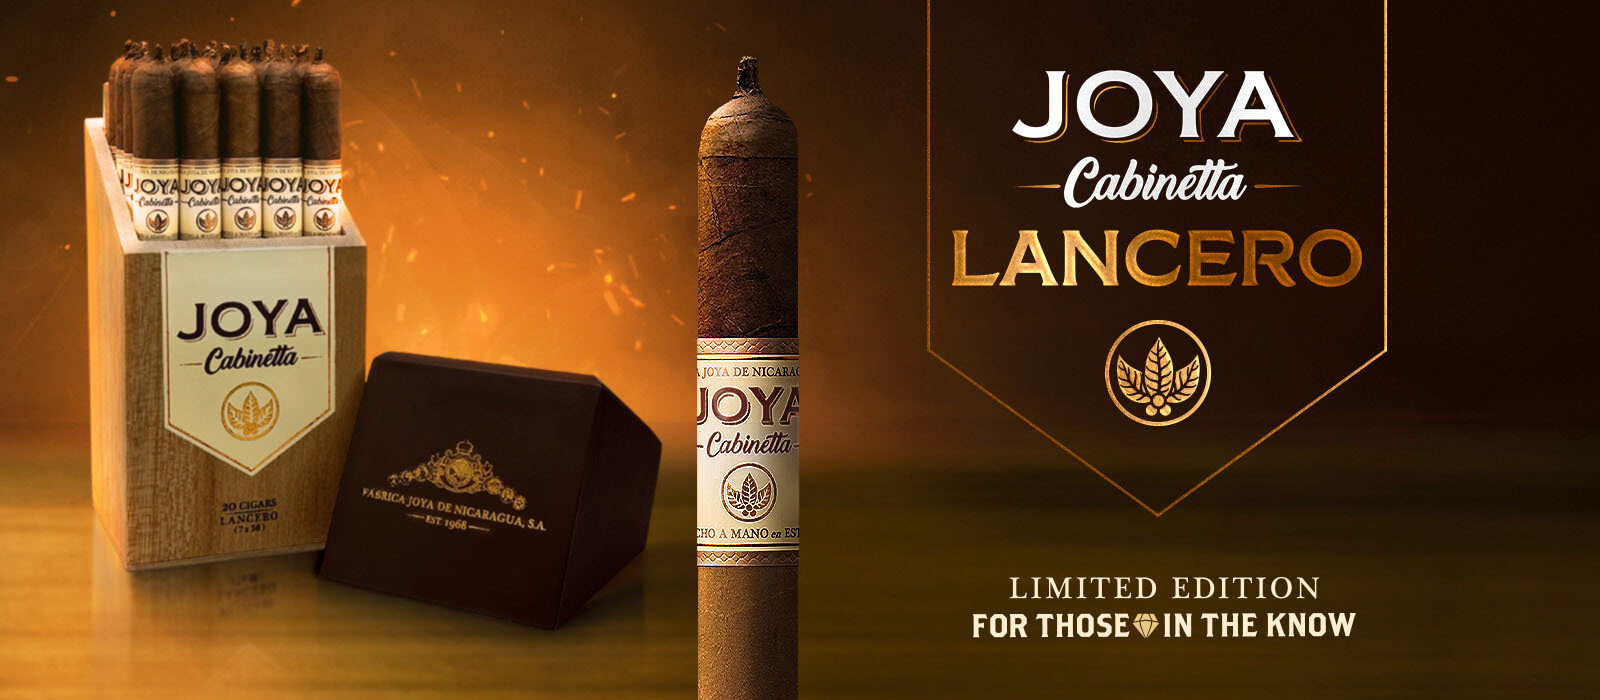 A luxurious cigar box with elegant design and two-tone wrapper